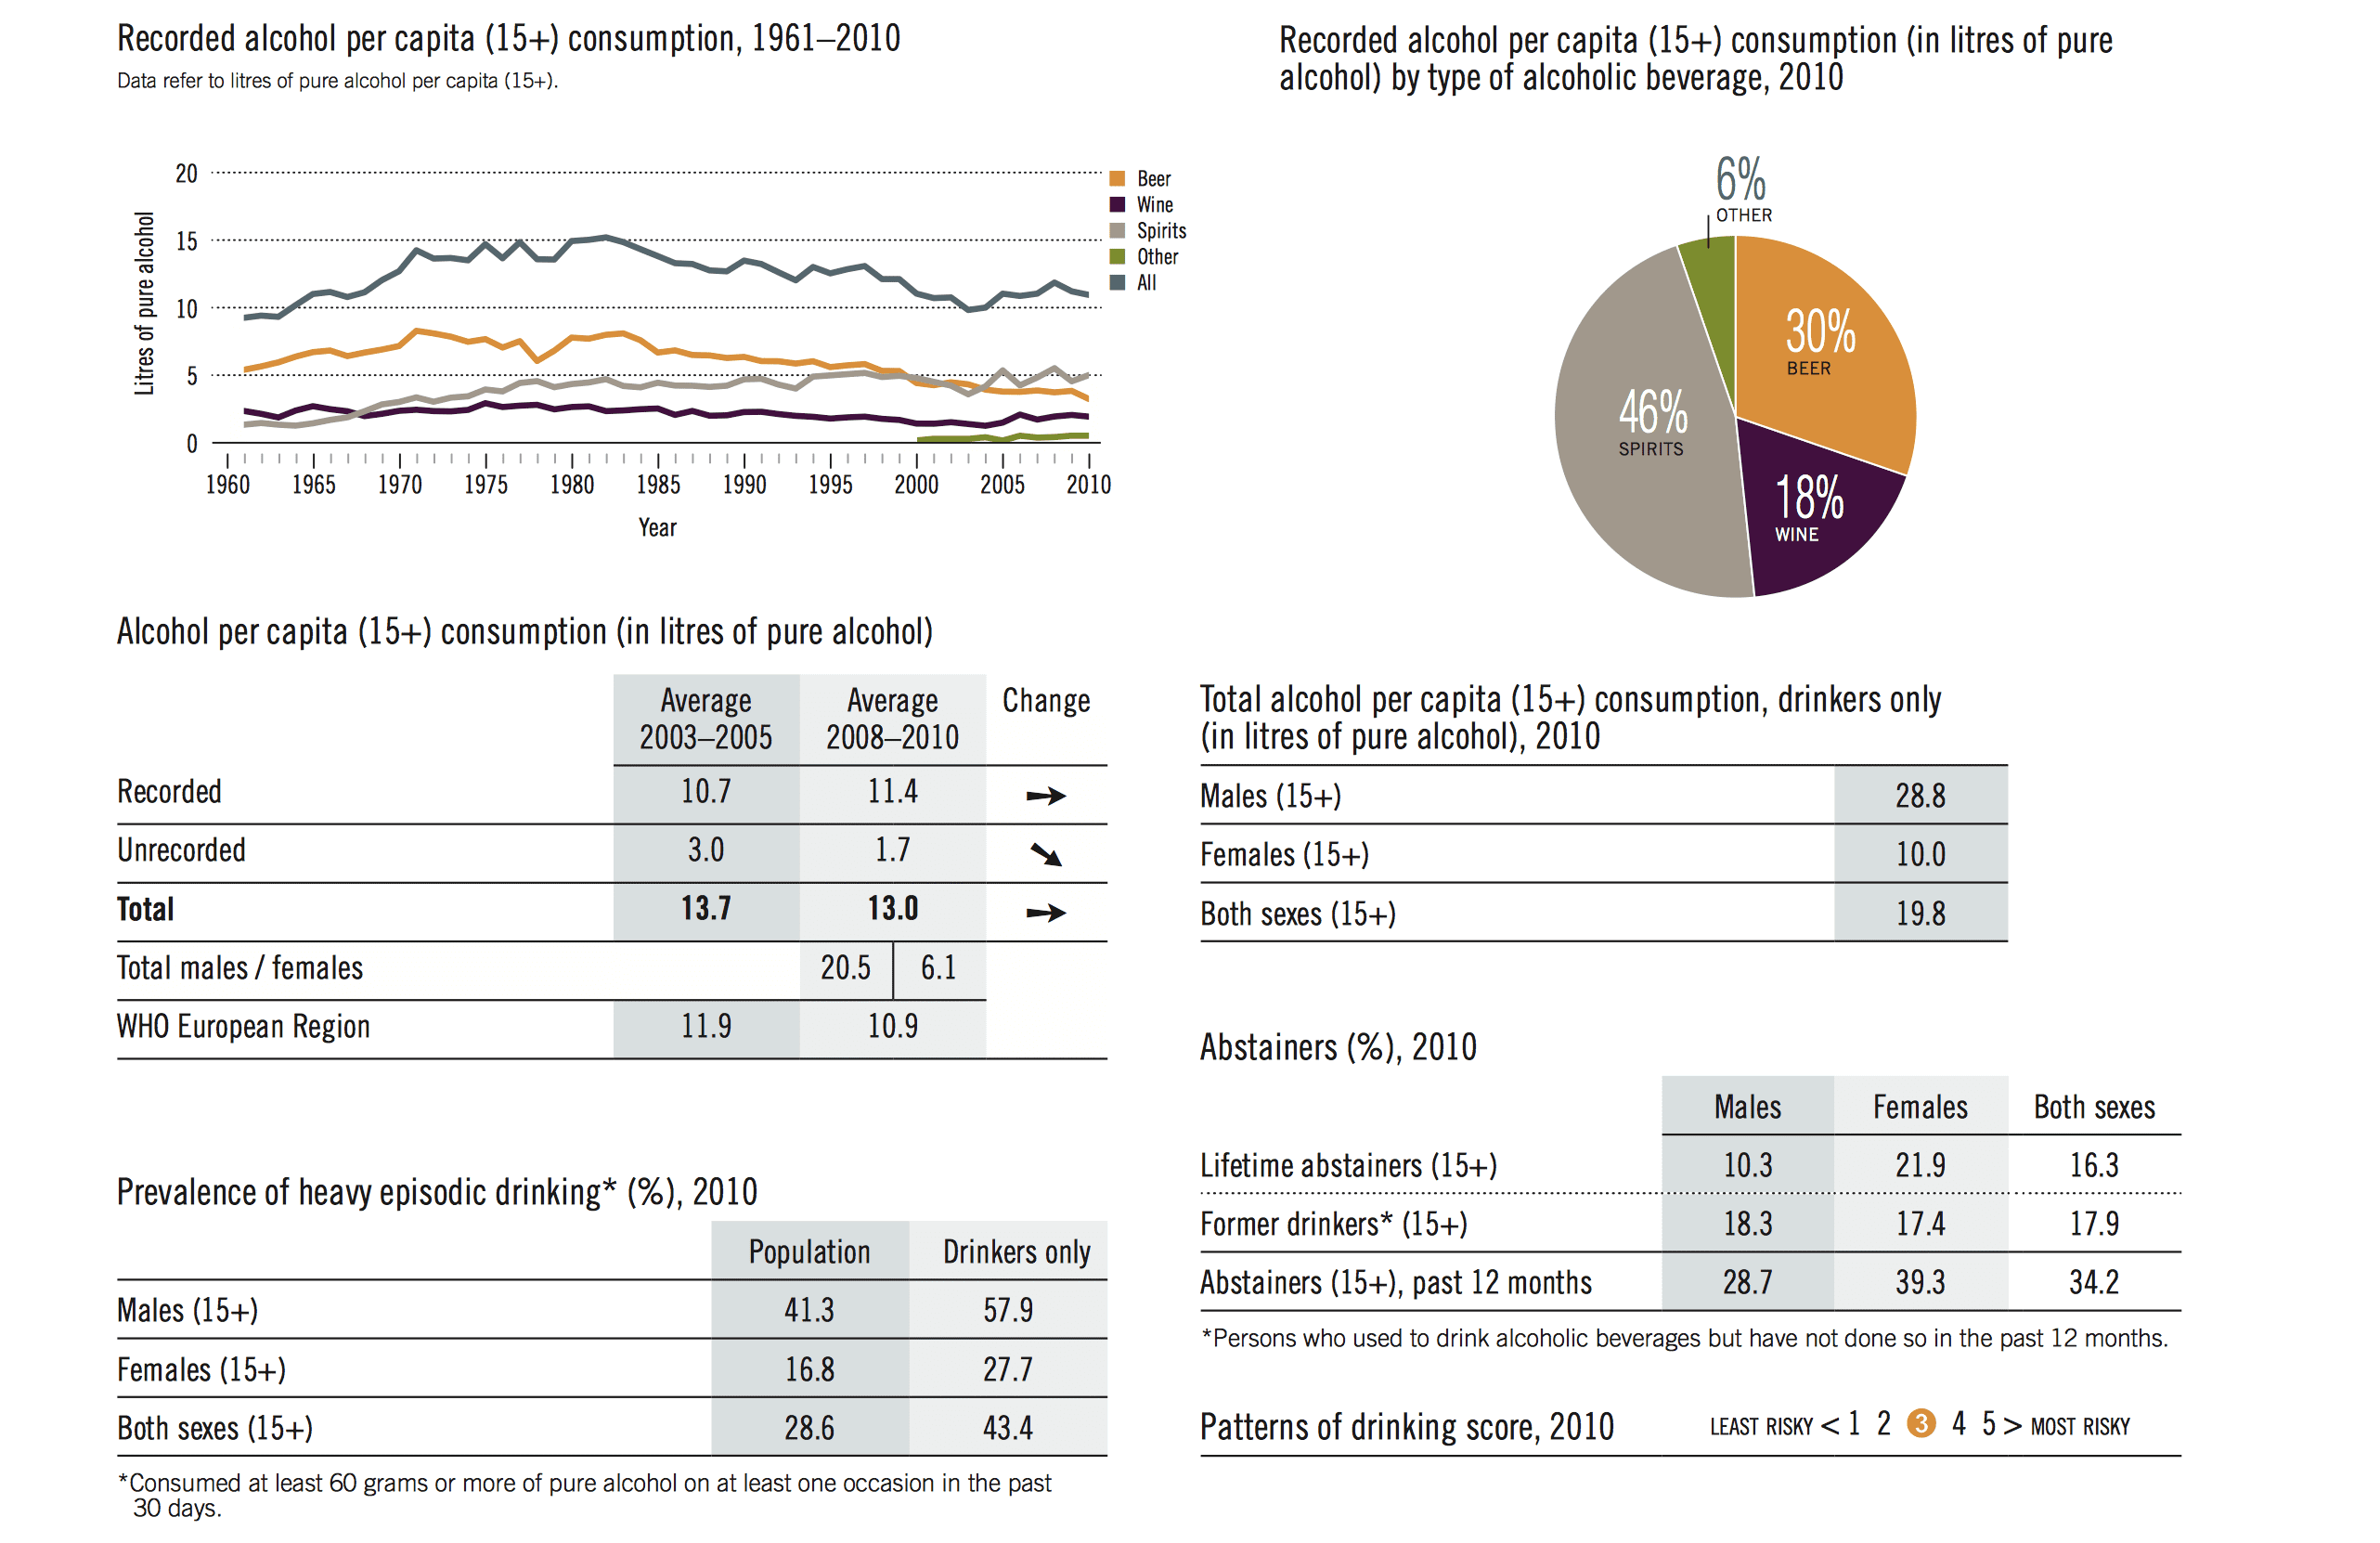 Country Profile Slovakia - alcohol consumption levels and patterns